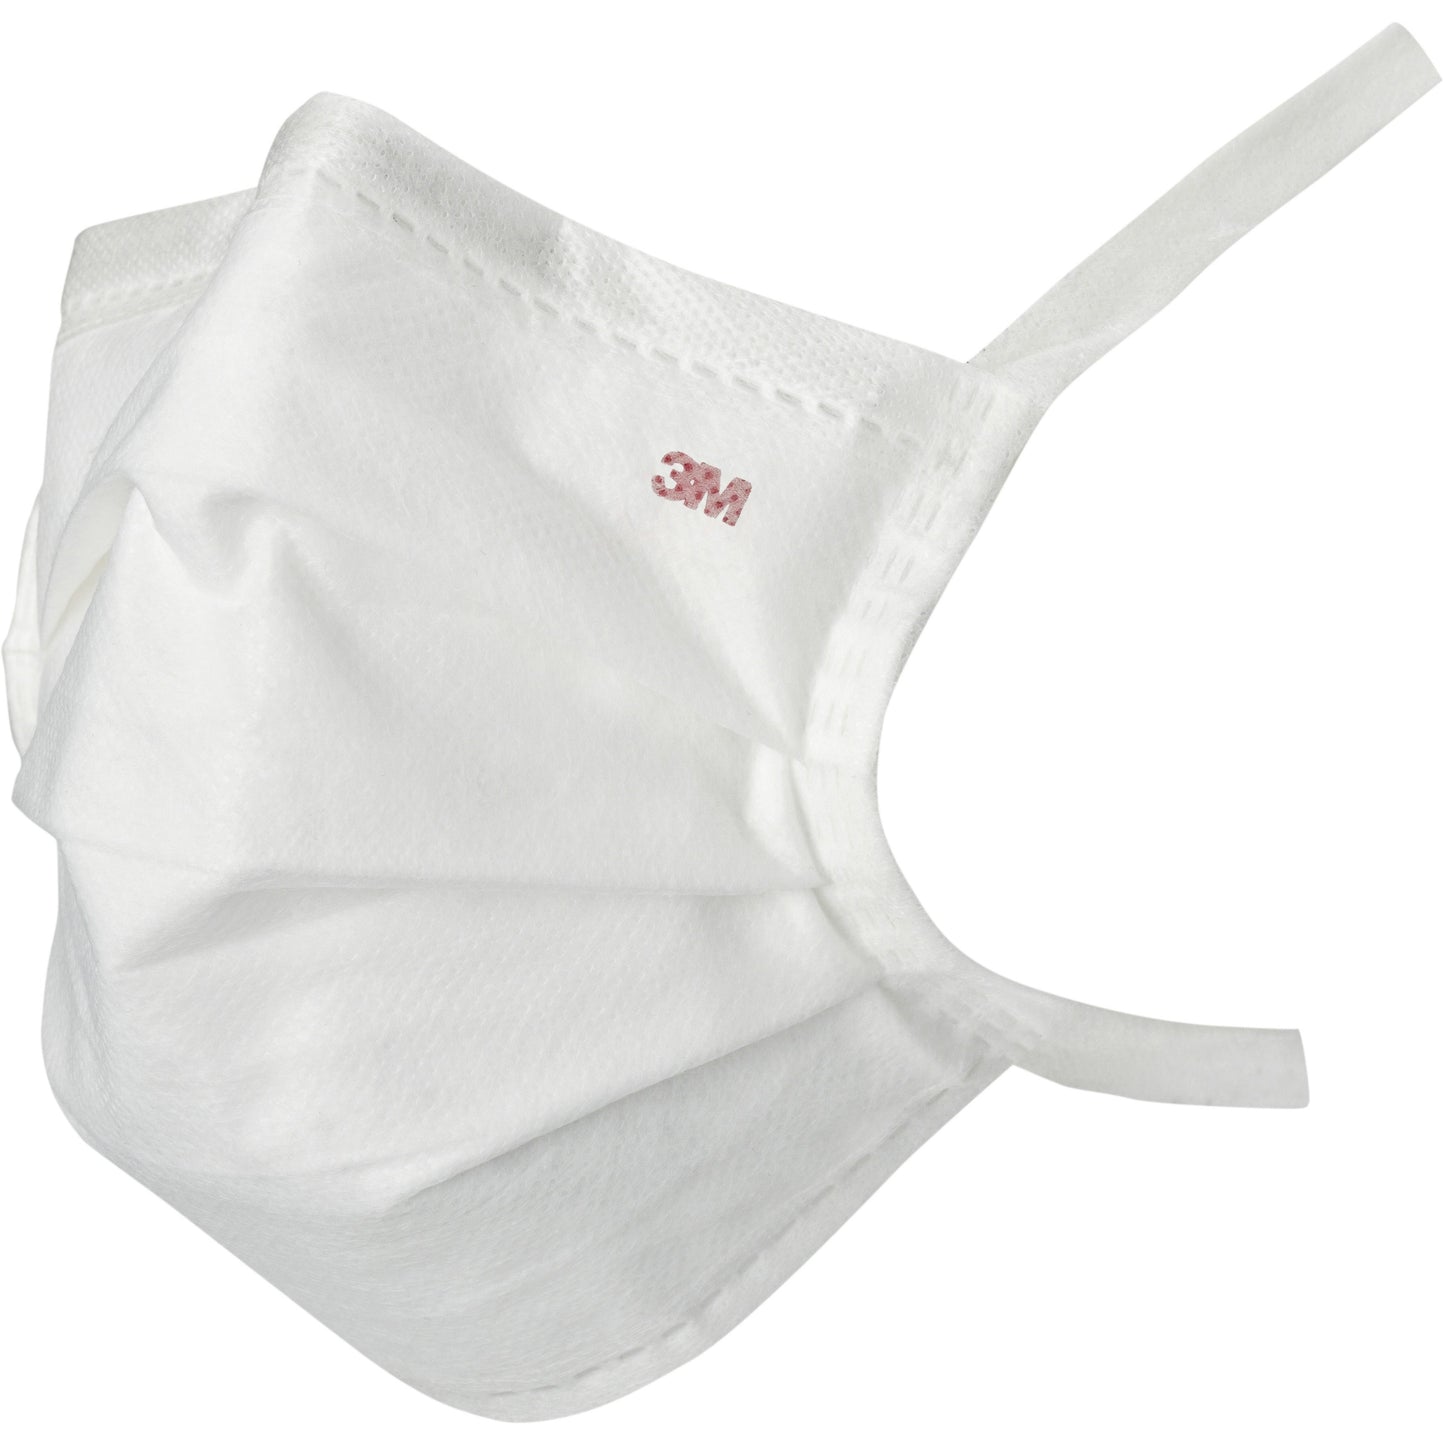 3M™ Splash Resistant Surgical Mask Type IIR - Pack of 80